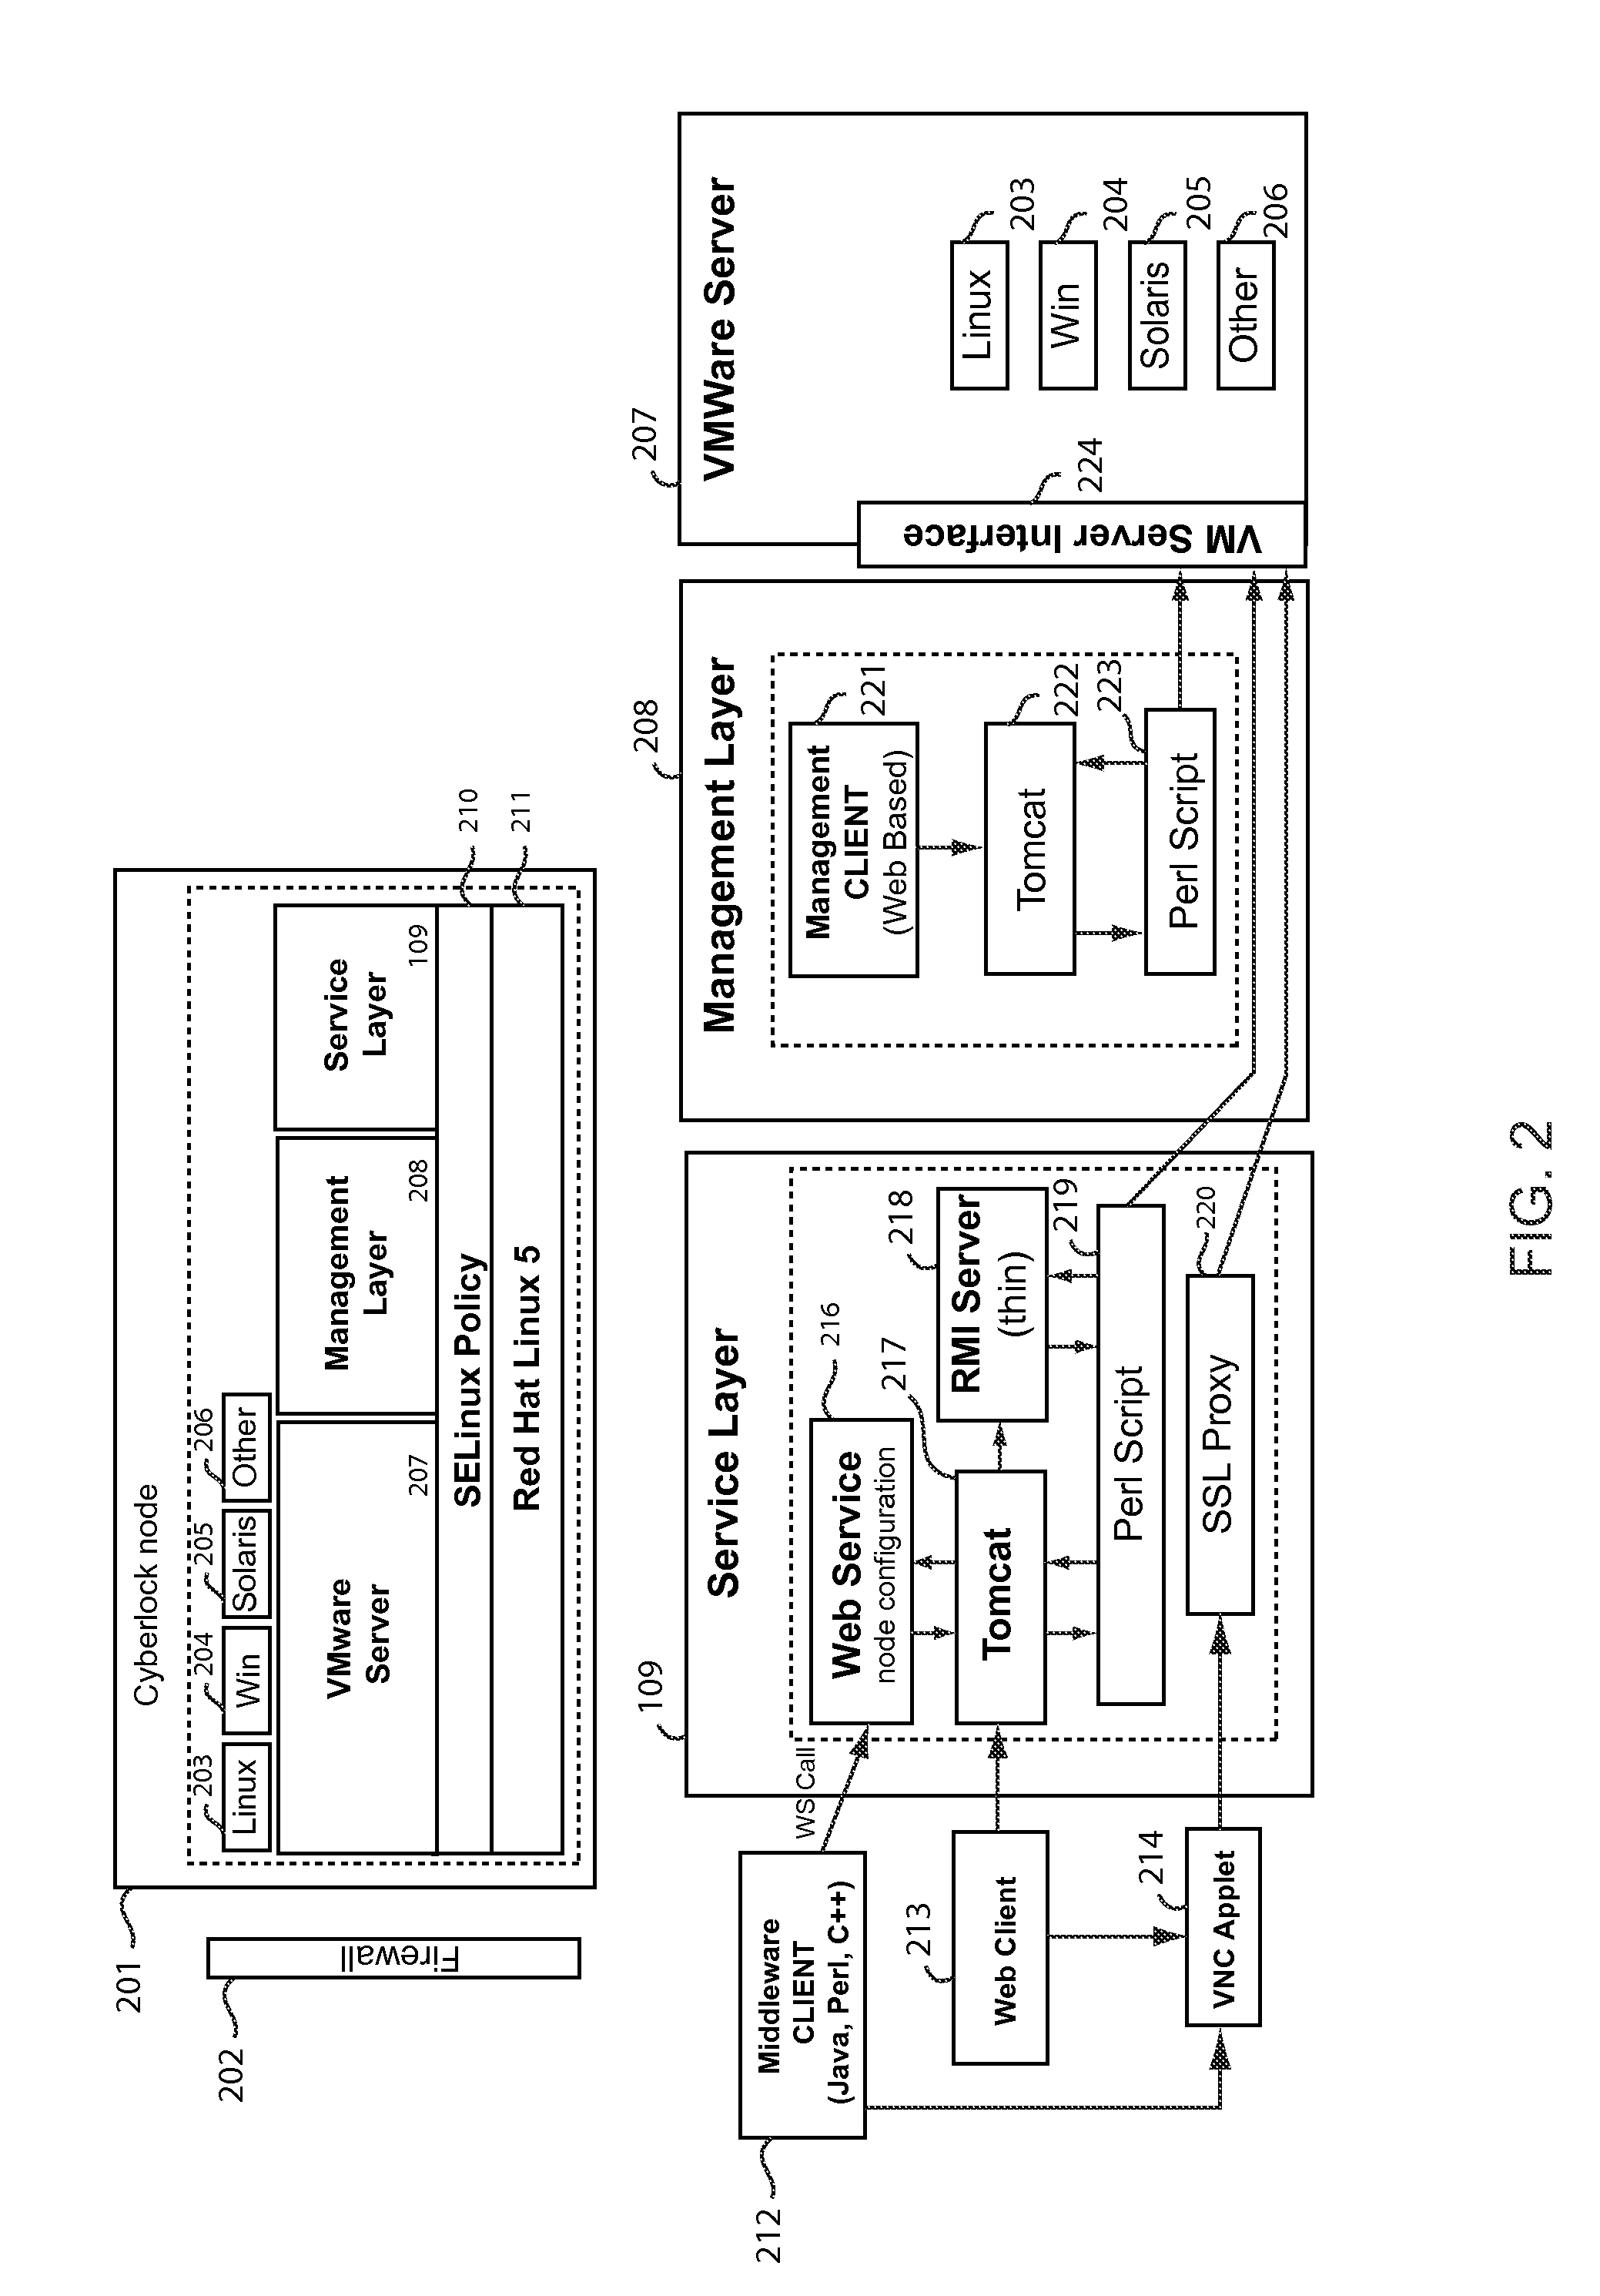 System and method for providing a virtualized secure data containment service with a networked environment